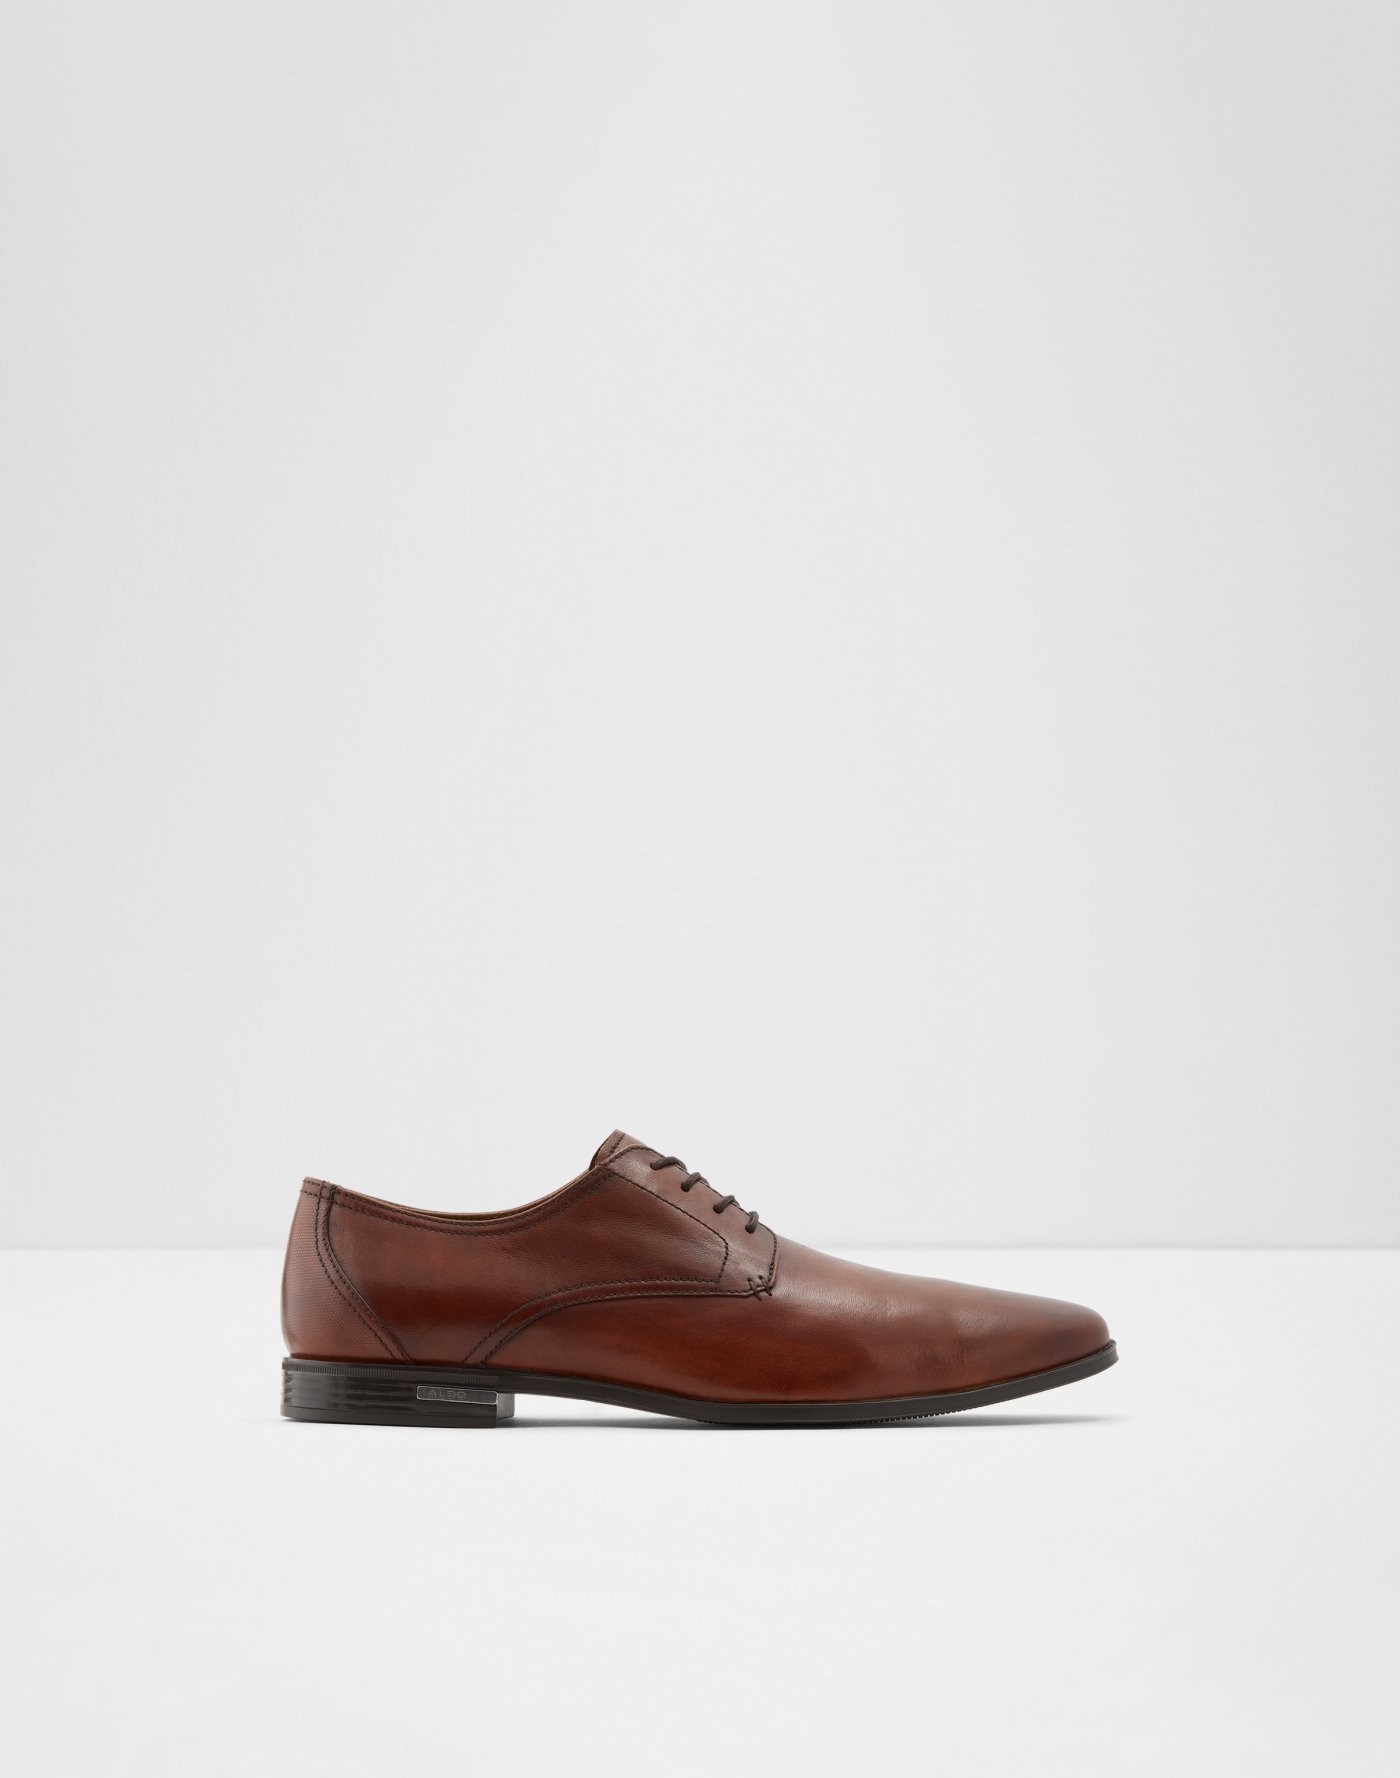 Clearance | Men's Shoes \u0026 Bags on 